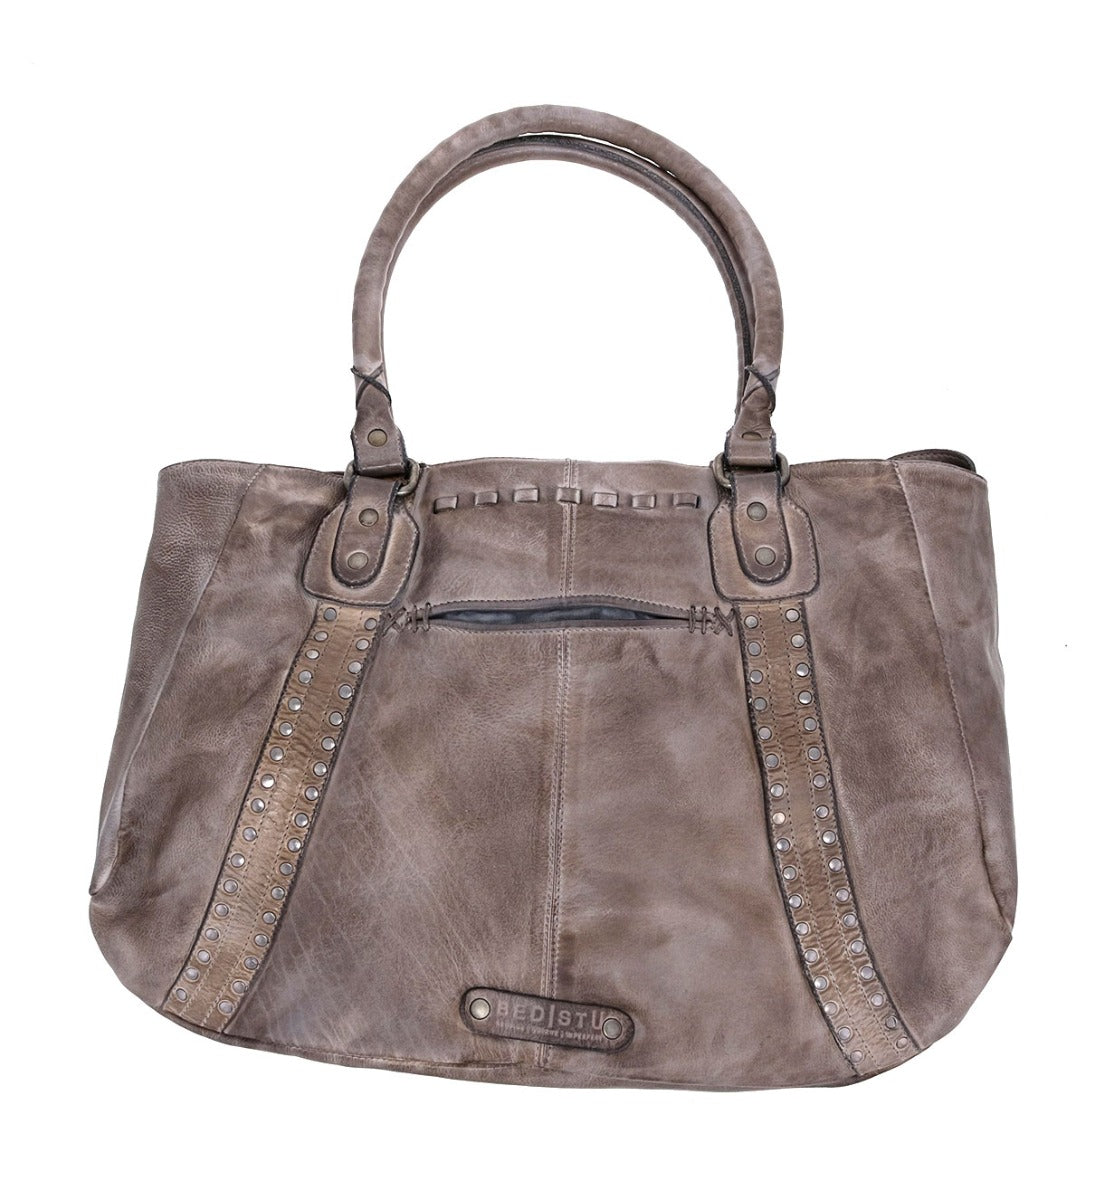 A Geraldin brown leather handbag with studded details by Bed Stu.